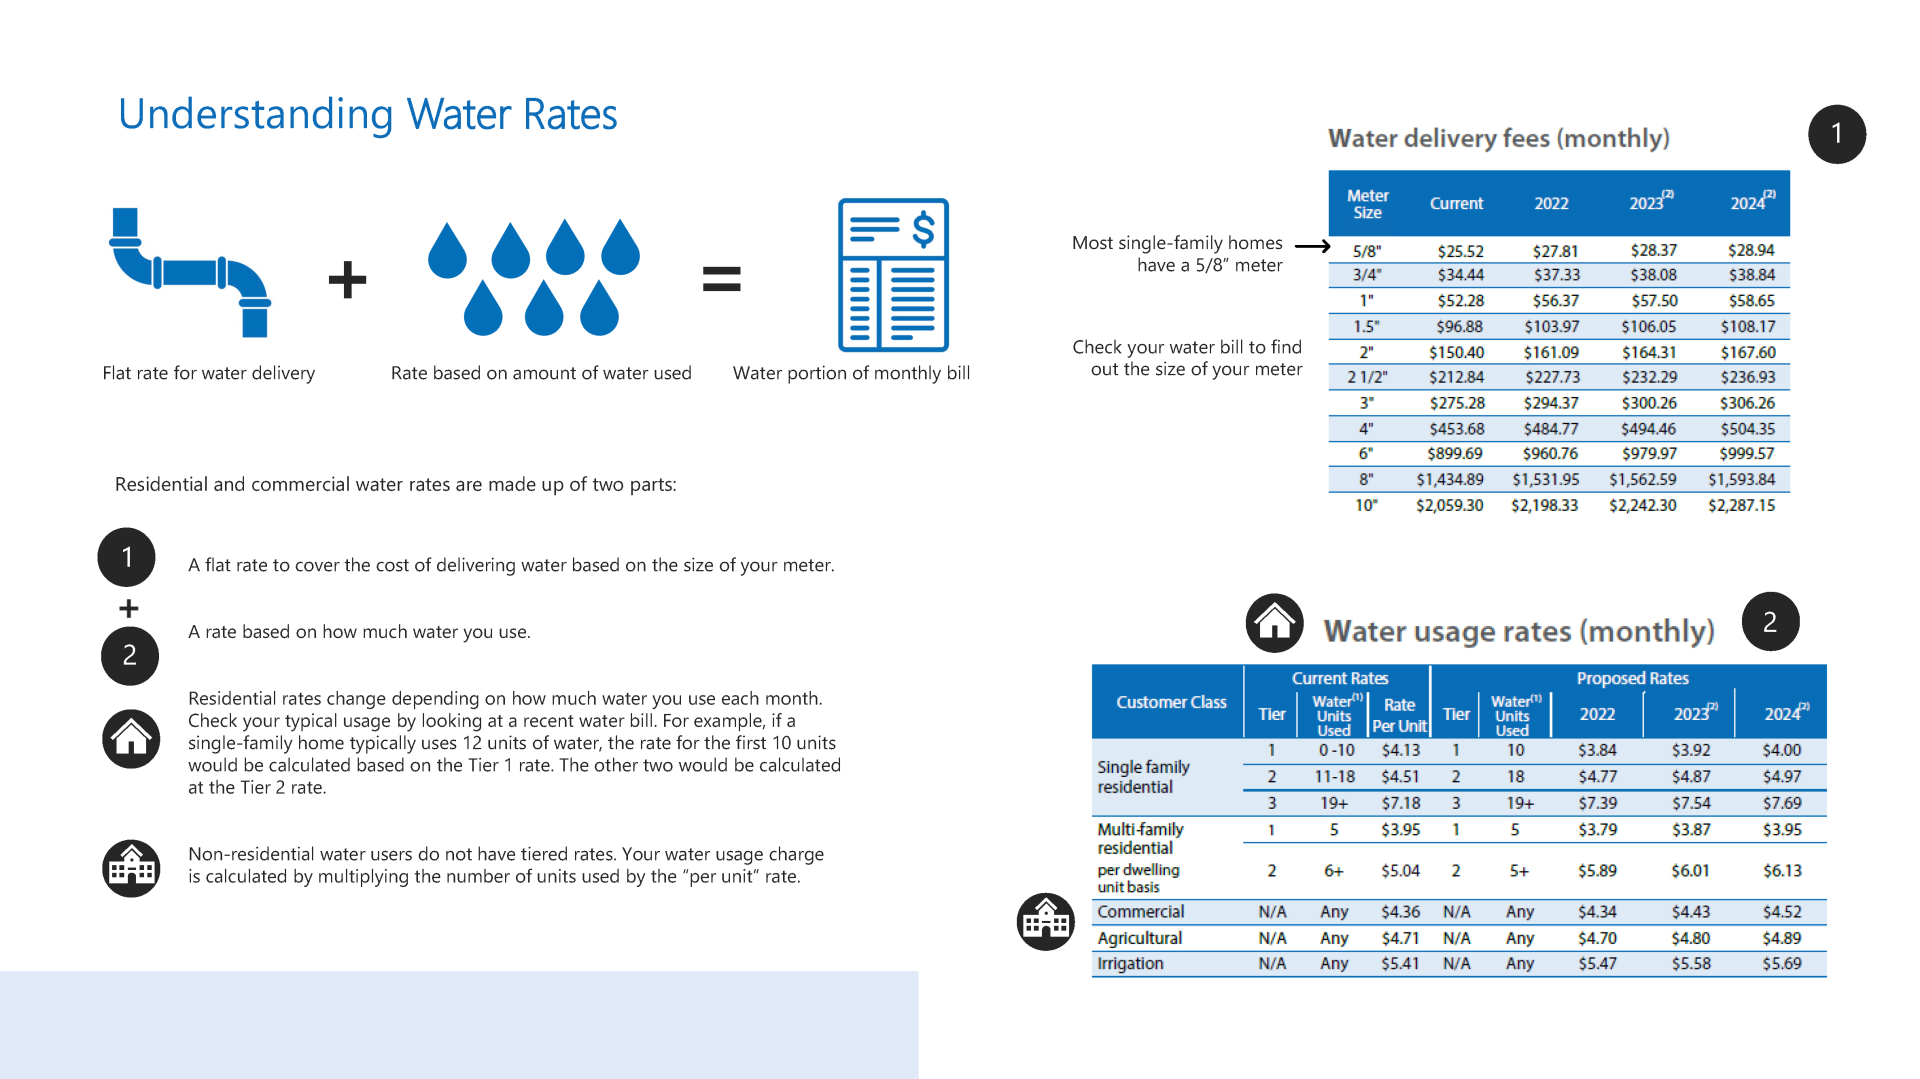 Proposed Water Rates Infographic